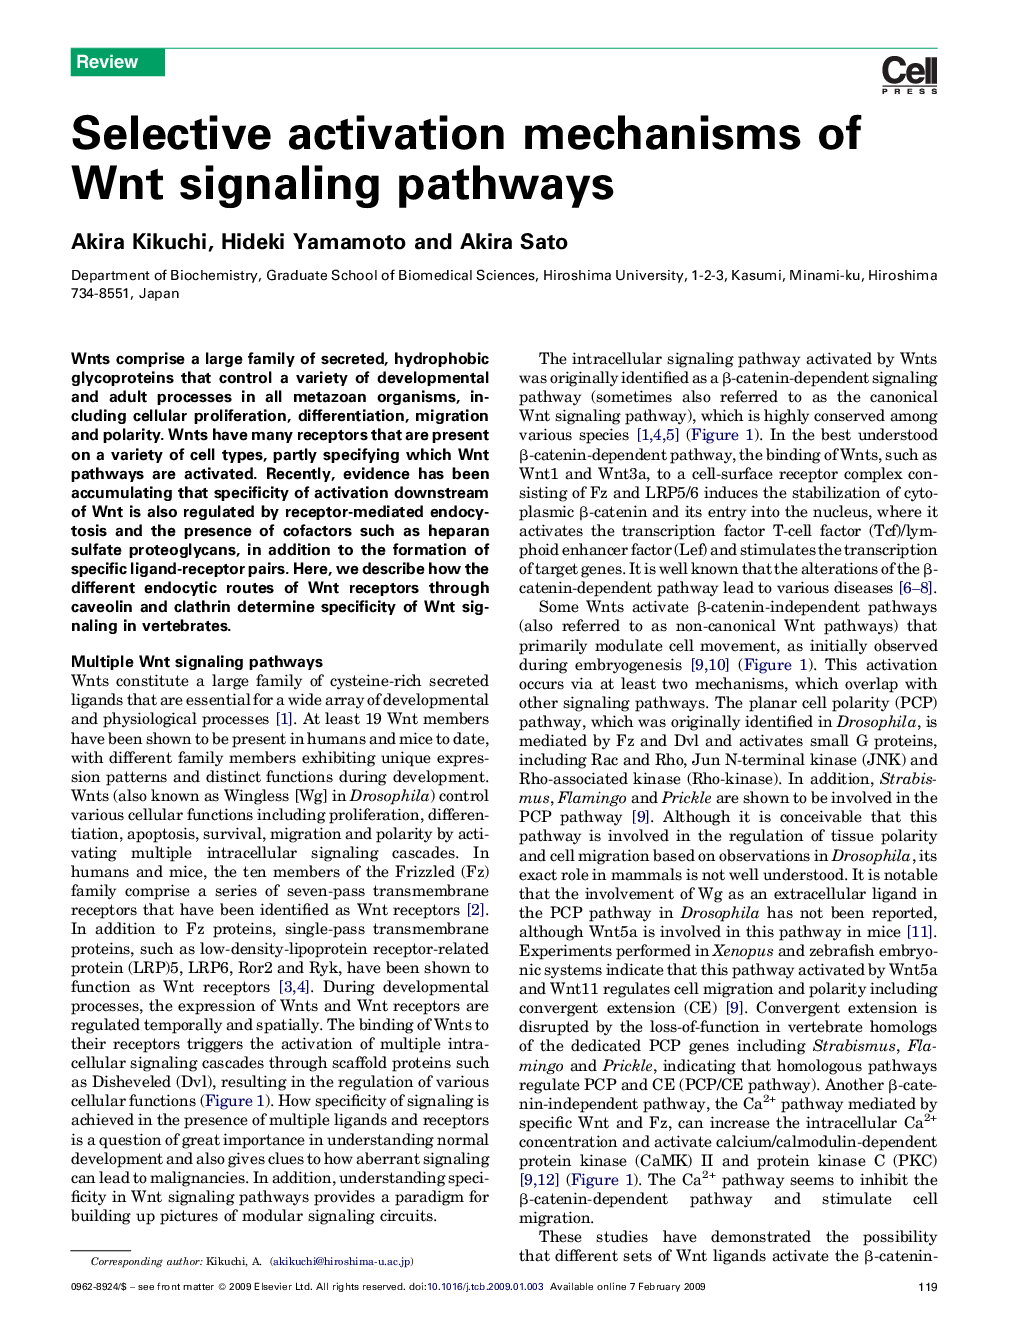 Selective activation mechanisms of Wnt signaling pathways